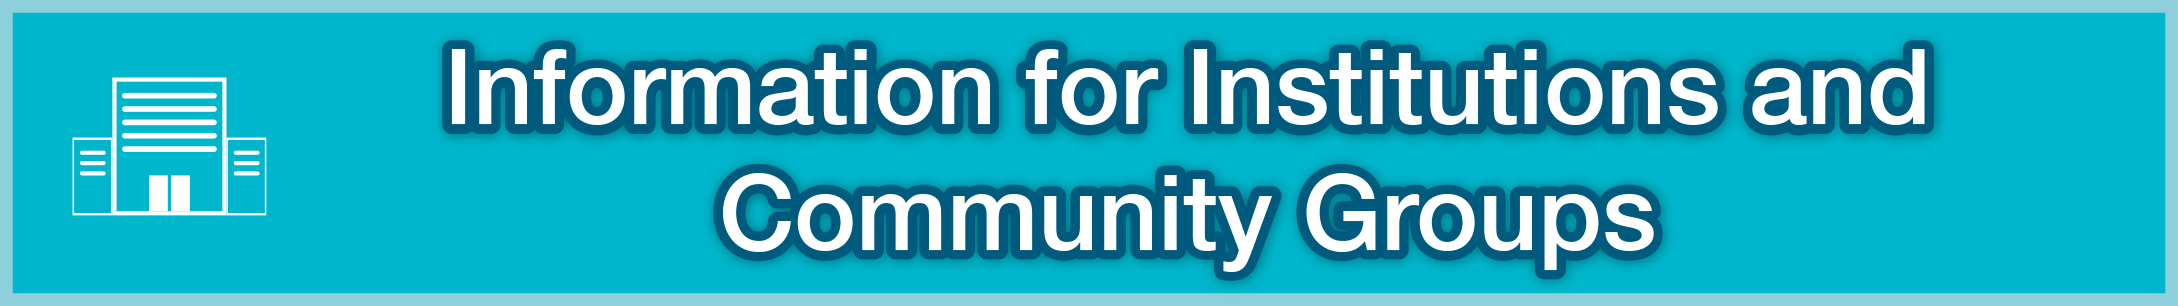 Information for Institutions and Community Groups